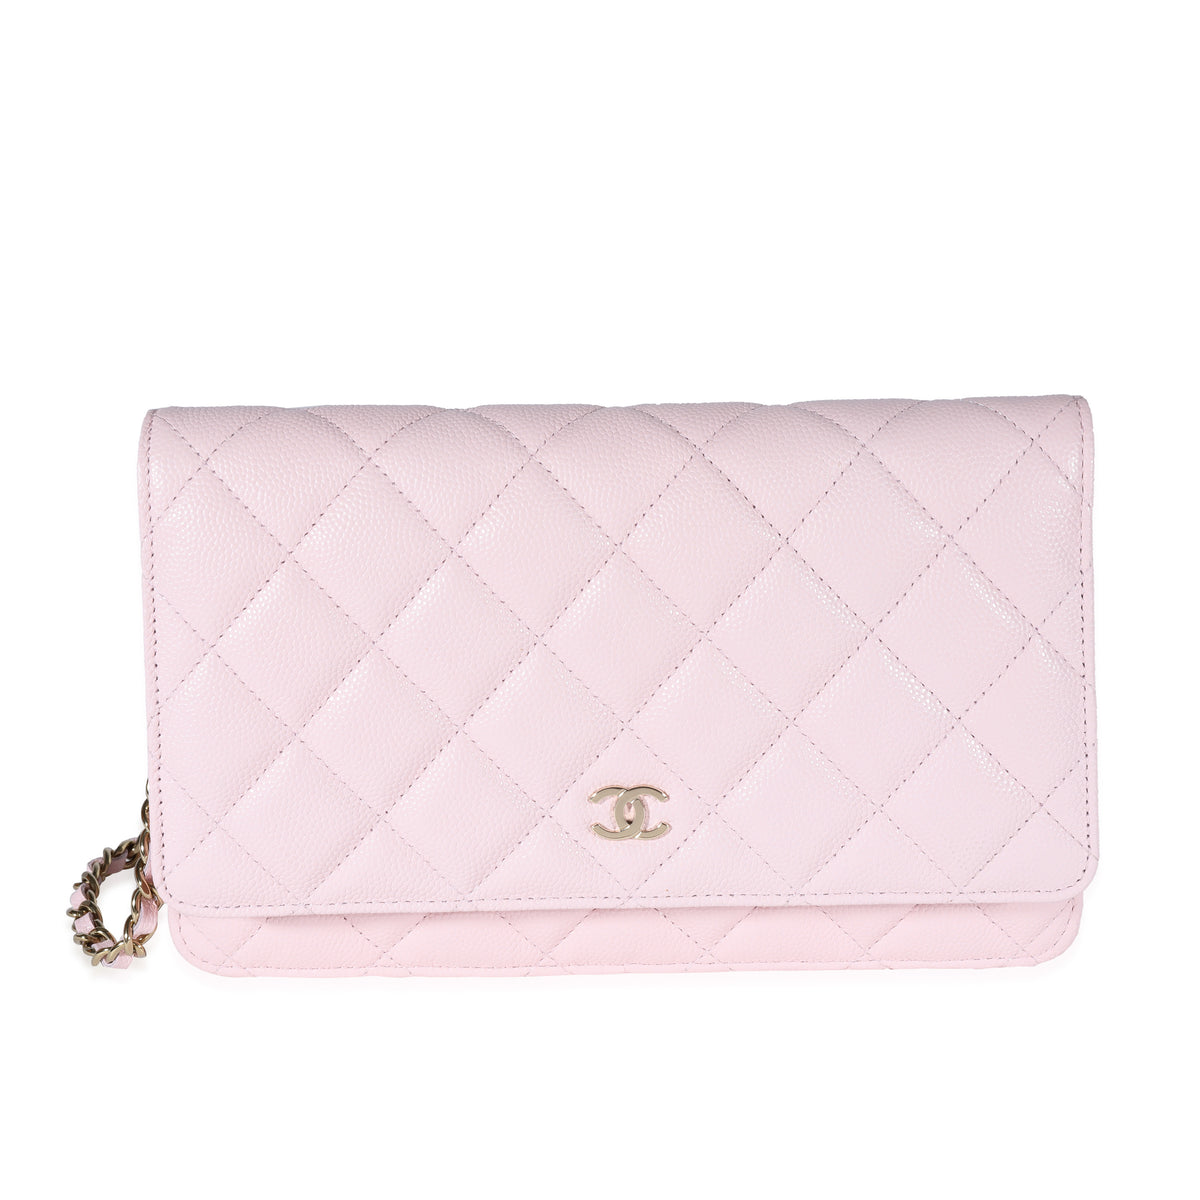 Chanel Wallet On Chain WOC White Caviar Light Gold Hardware